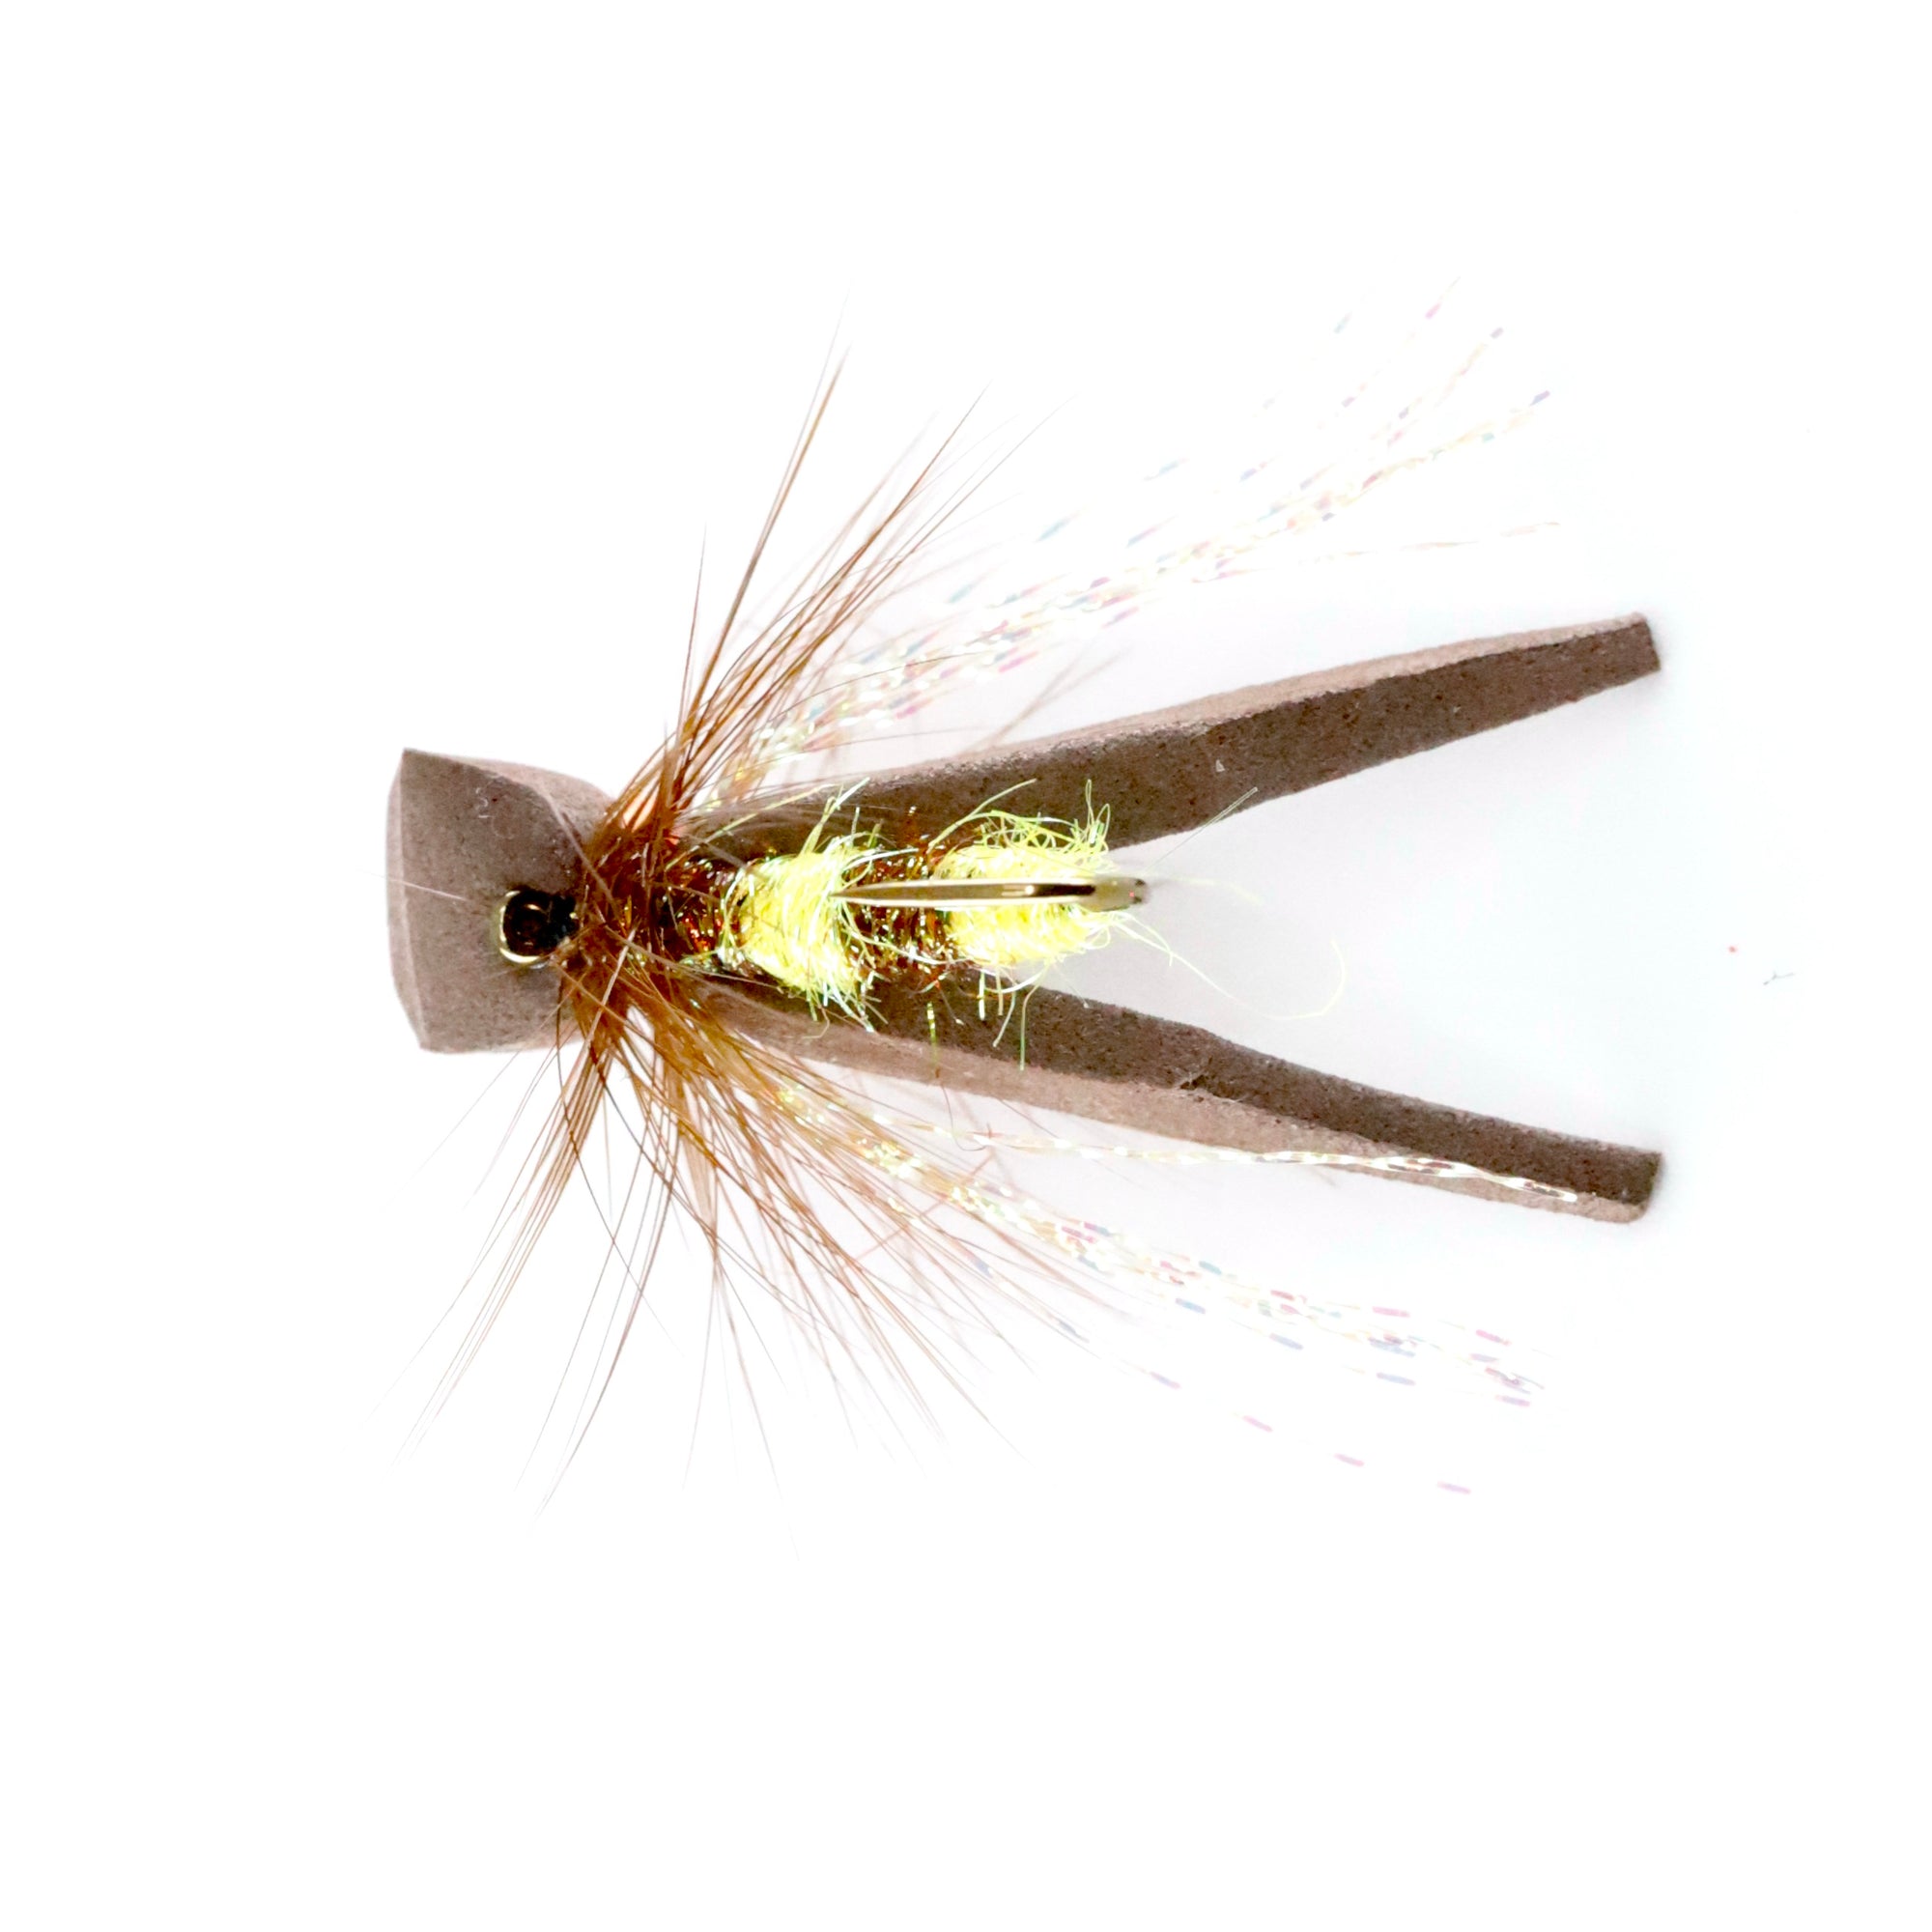 Rio's Steel Plow Brown/Yellow